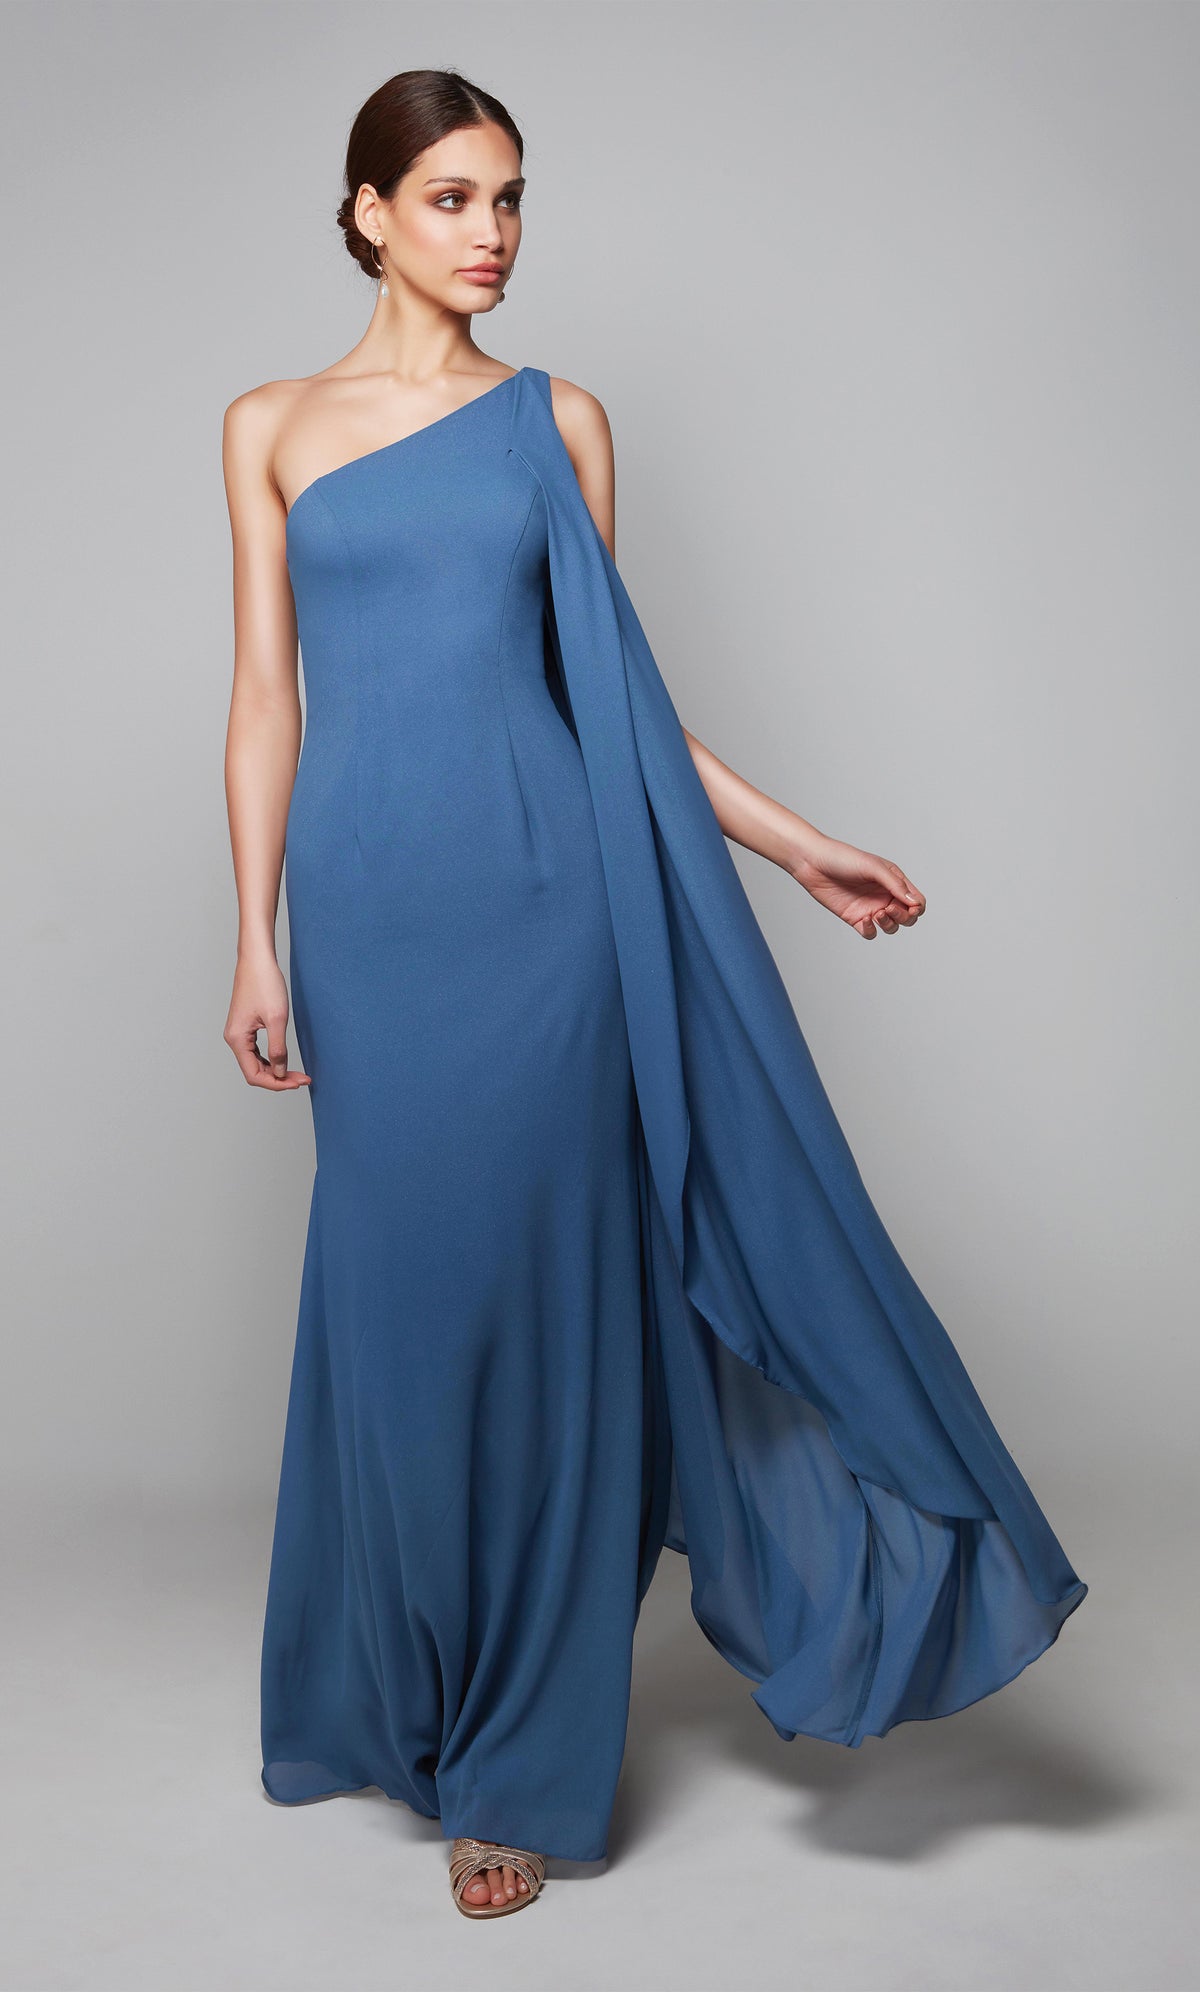 Blue one shoulder mother of the groom dress with a wrap hem cape.